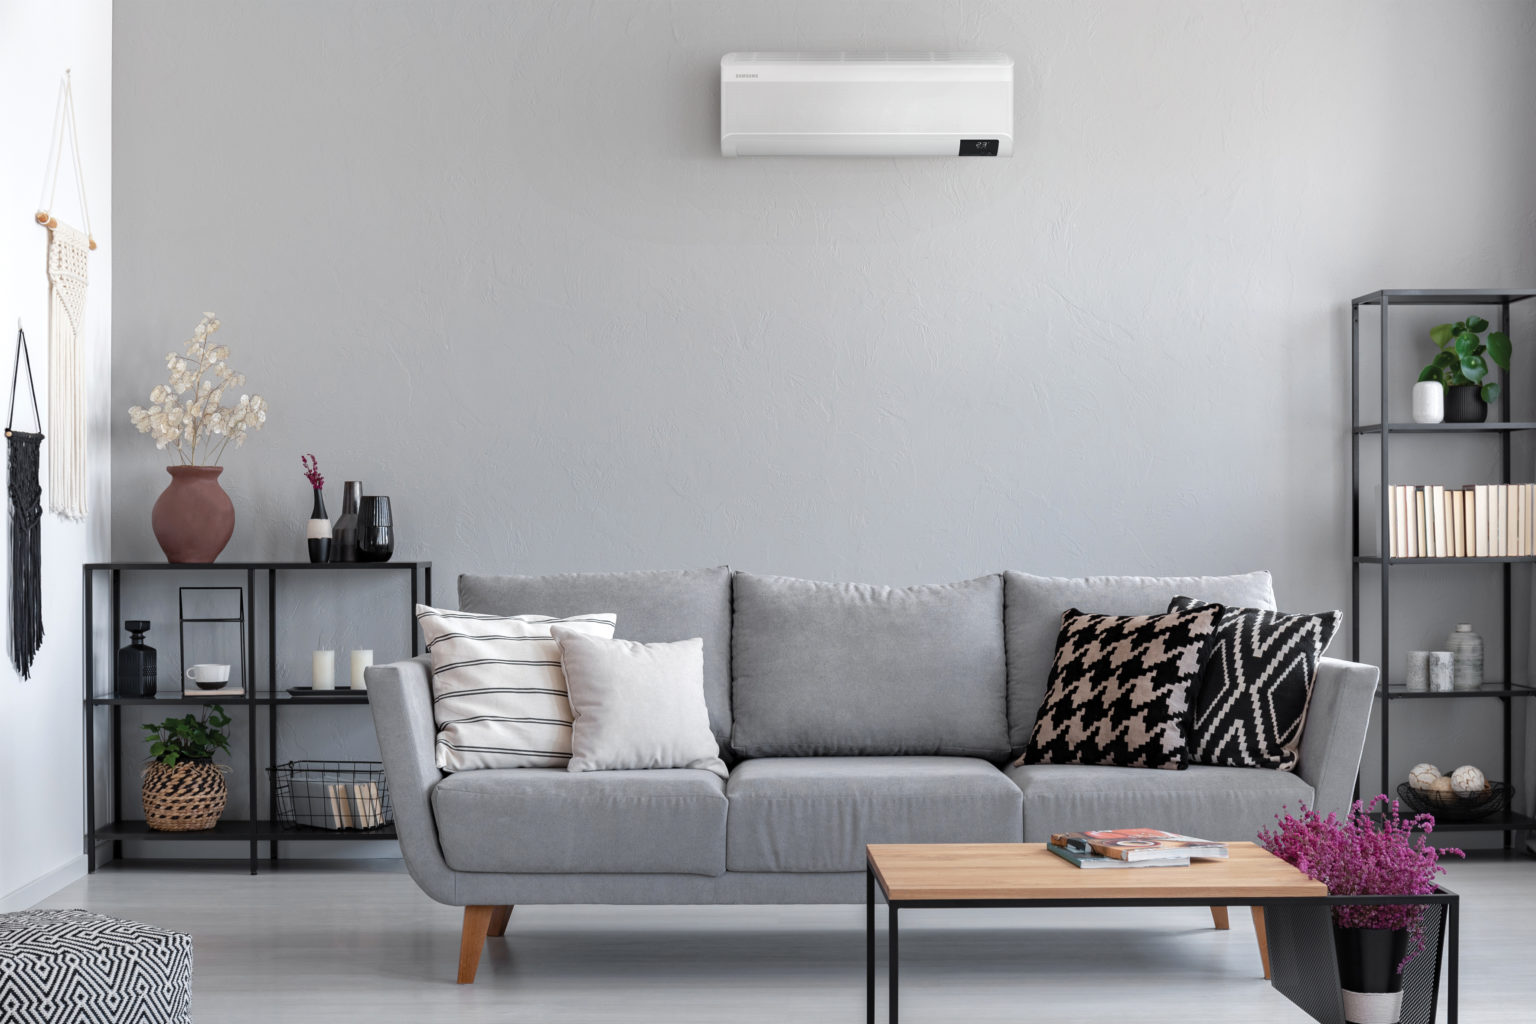 Peak air con season and a new Samsung model for a better sleep - The ...